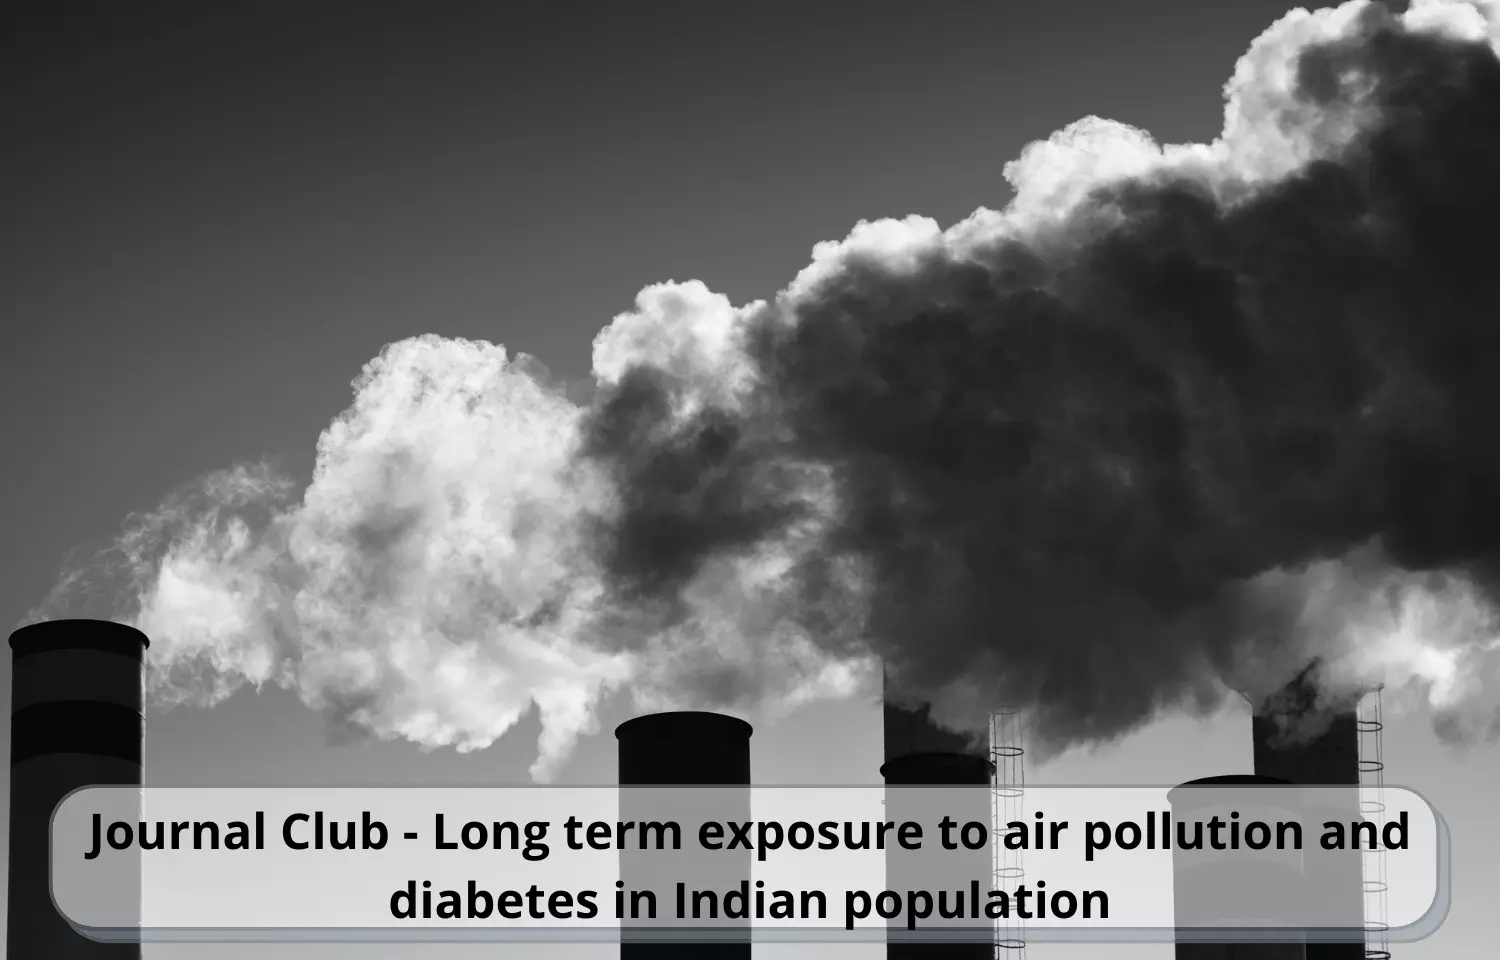 Journal Club - Long term exposure to air pollution linked to diabetes in Indian population